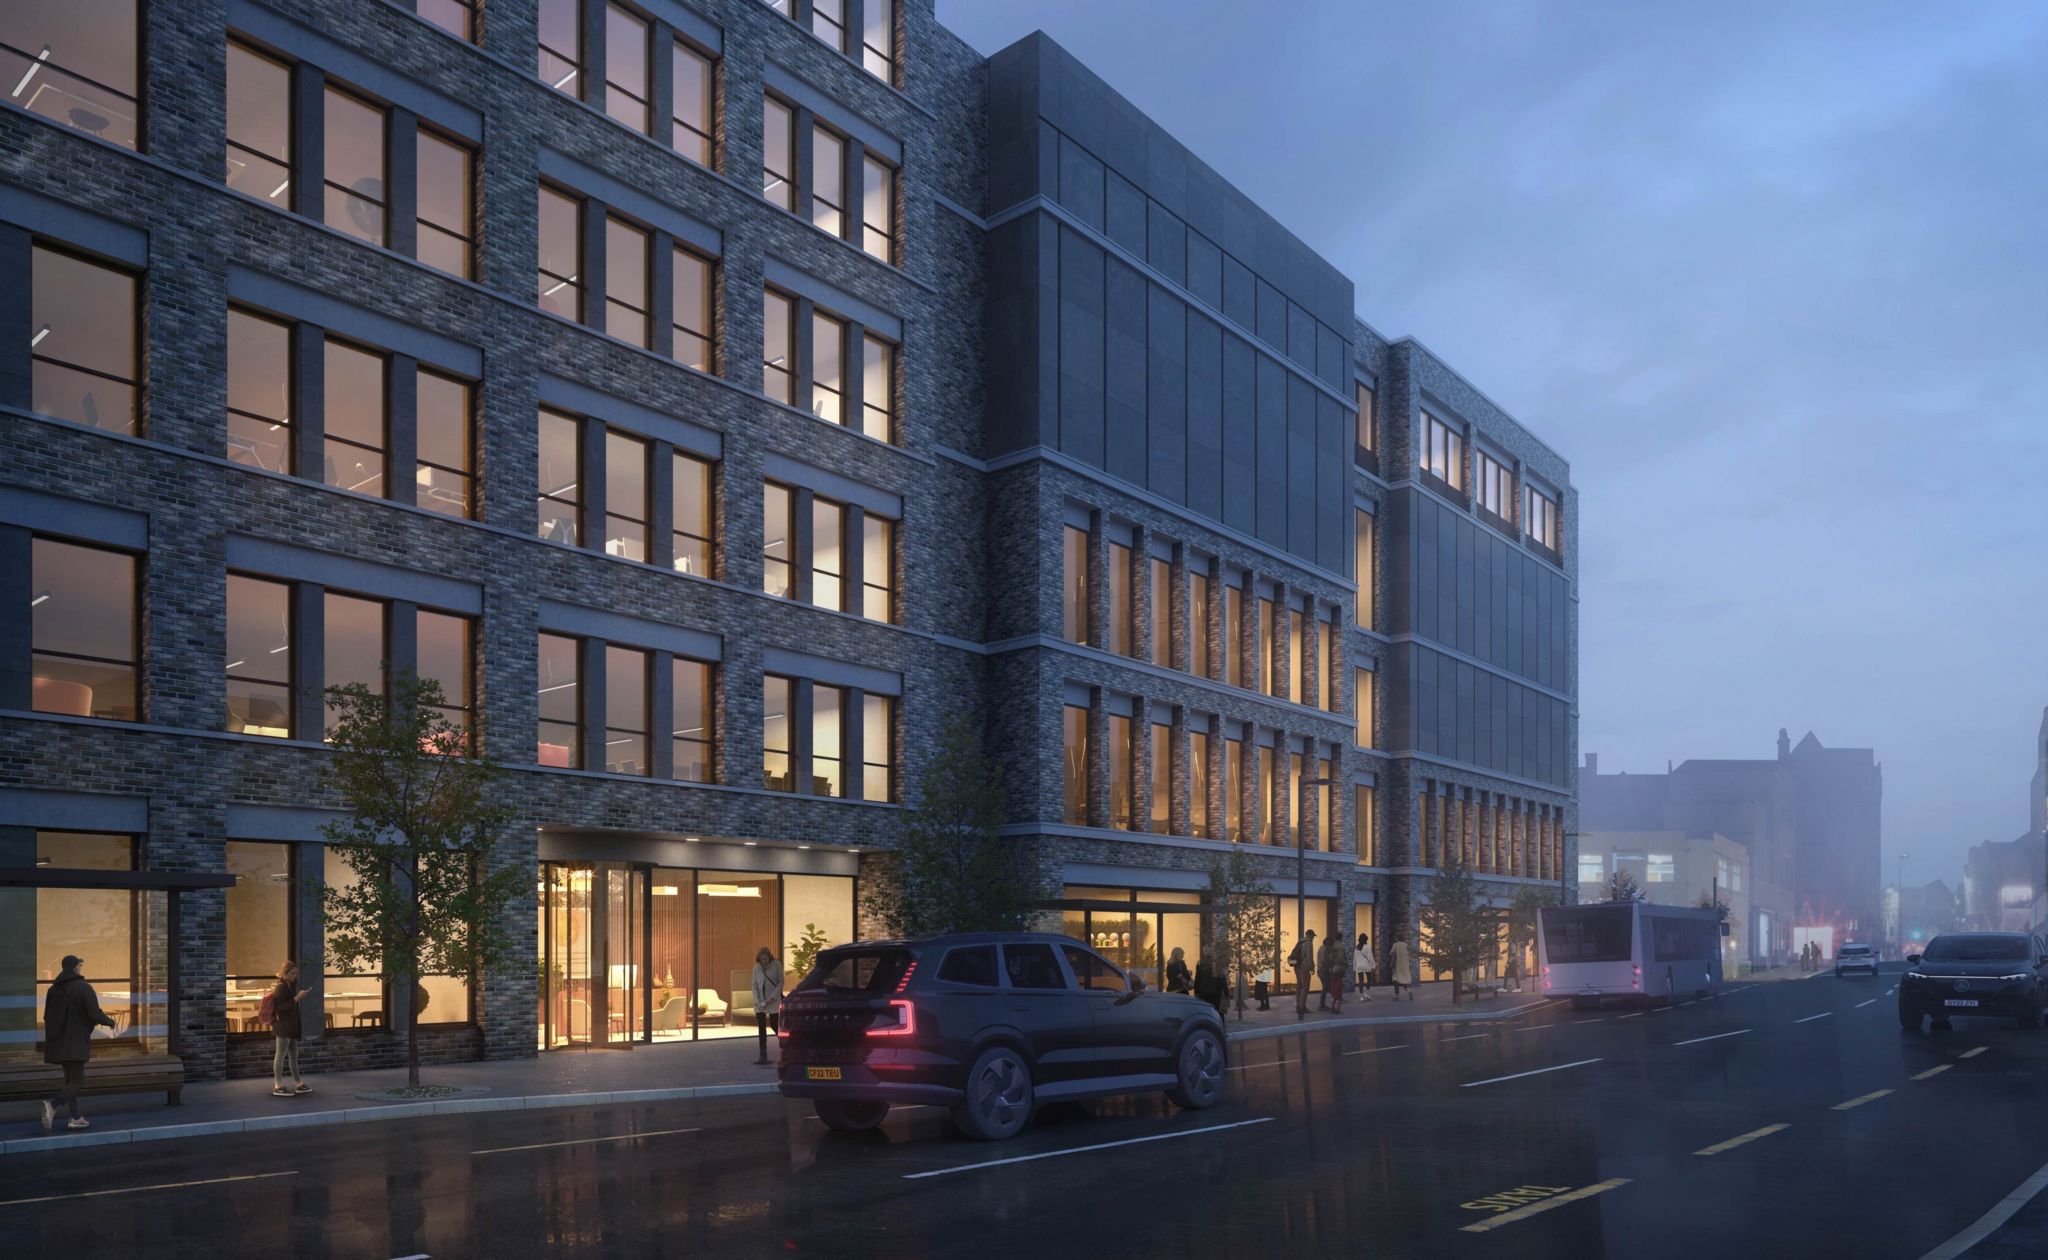 Artist's impression of a view of the building from the Lord Street site at dusk